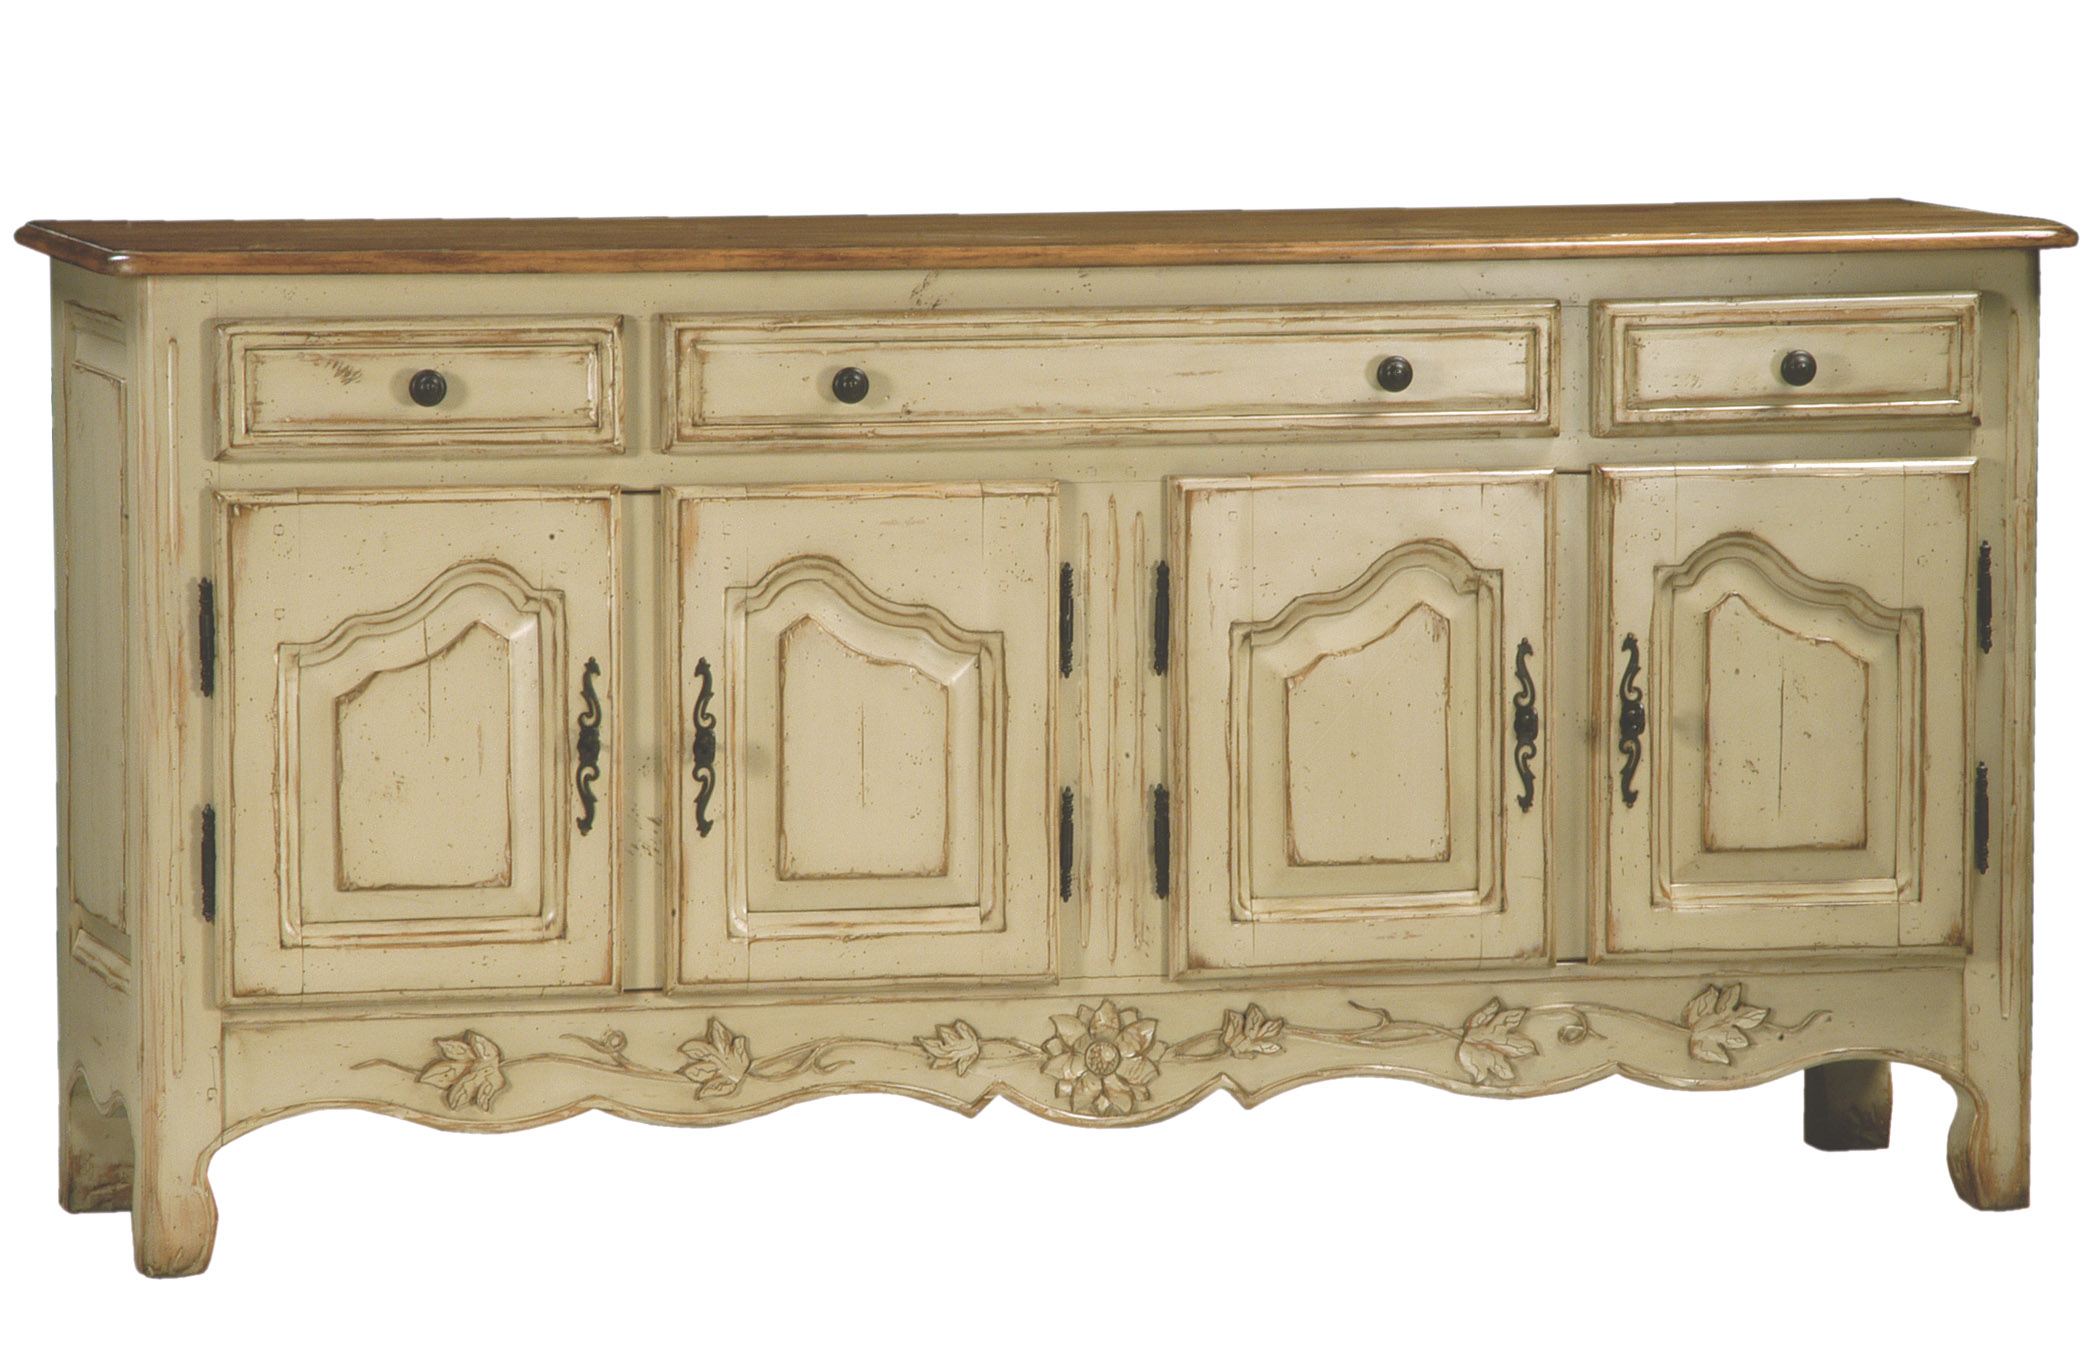 Hennessey traditional painted sideboard cabinet with optional vineyard carving on base by Woodland furniture in Idaho Falls